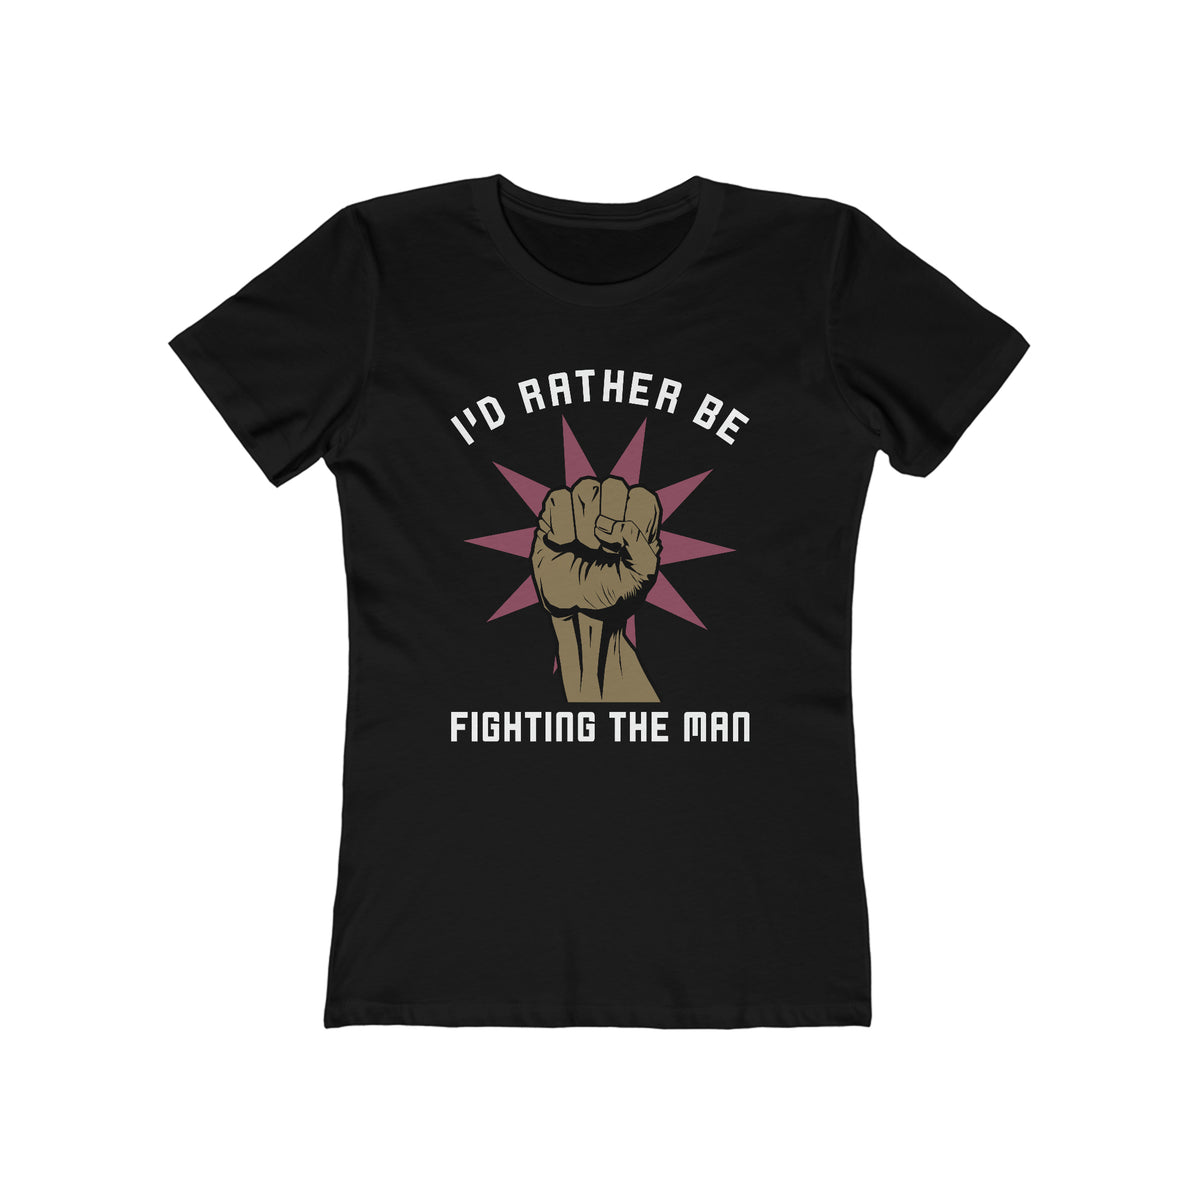 I'D Rather Be Fighting The Man - Women’s T-Shirt